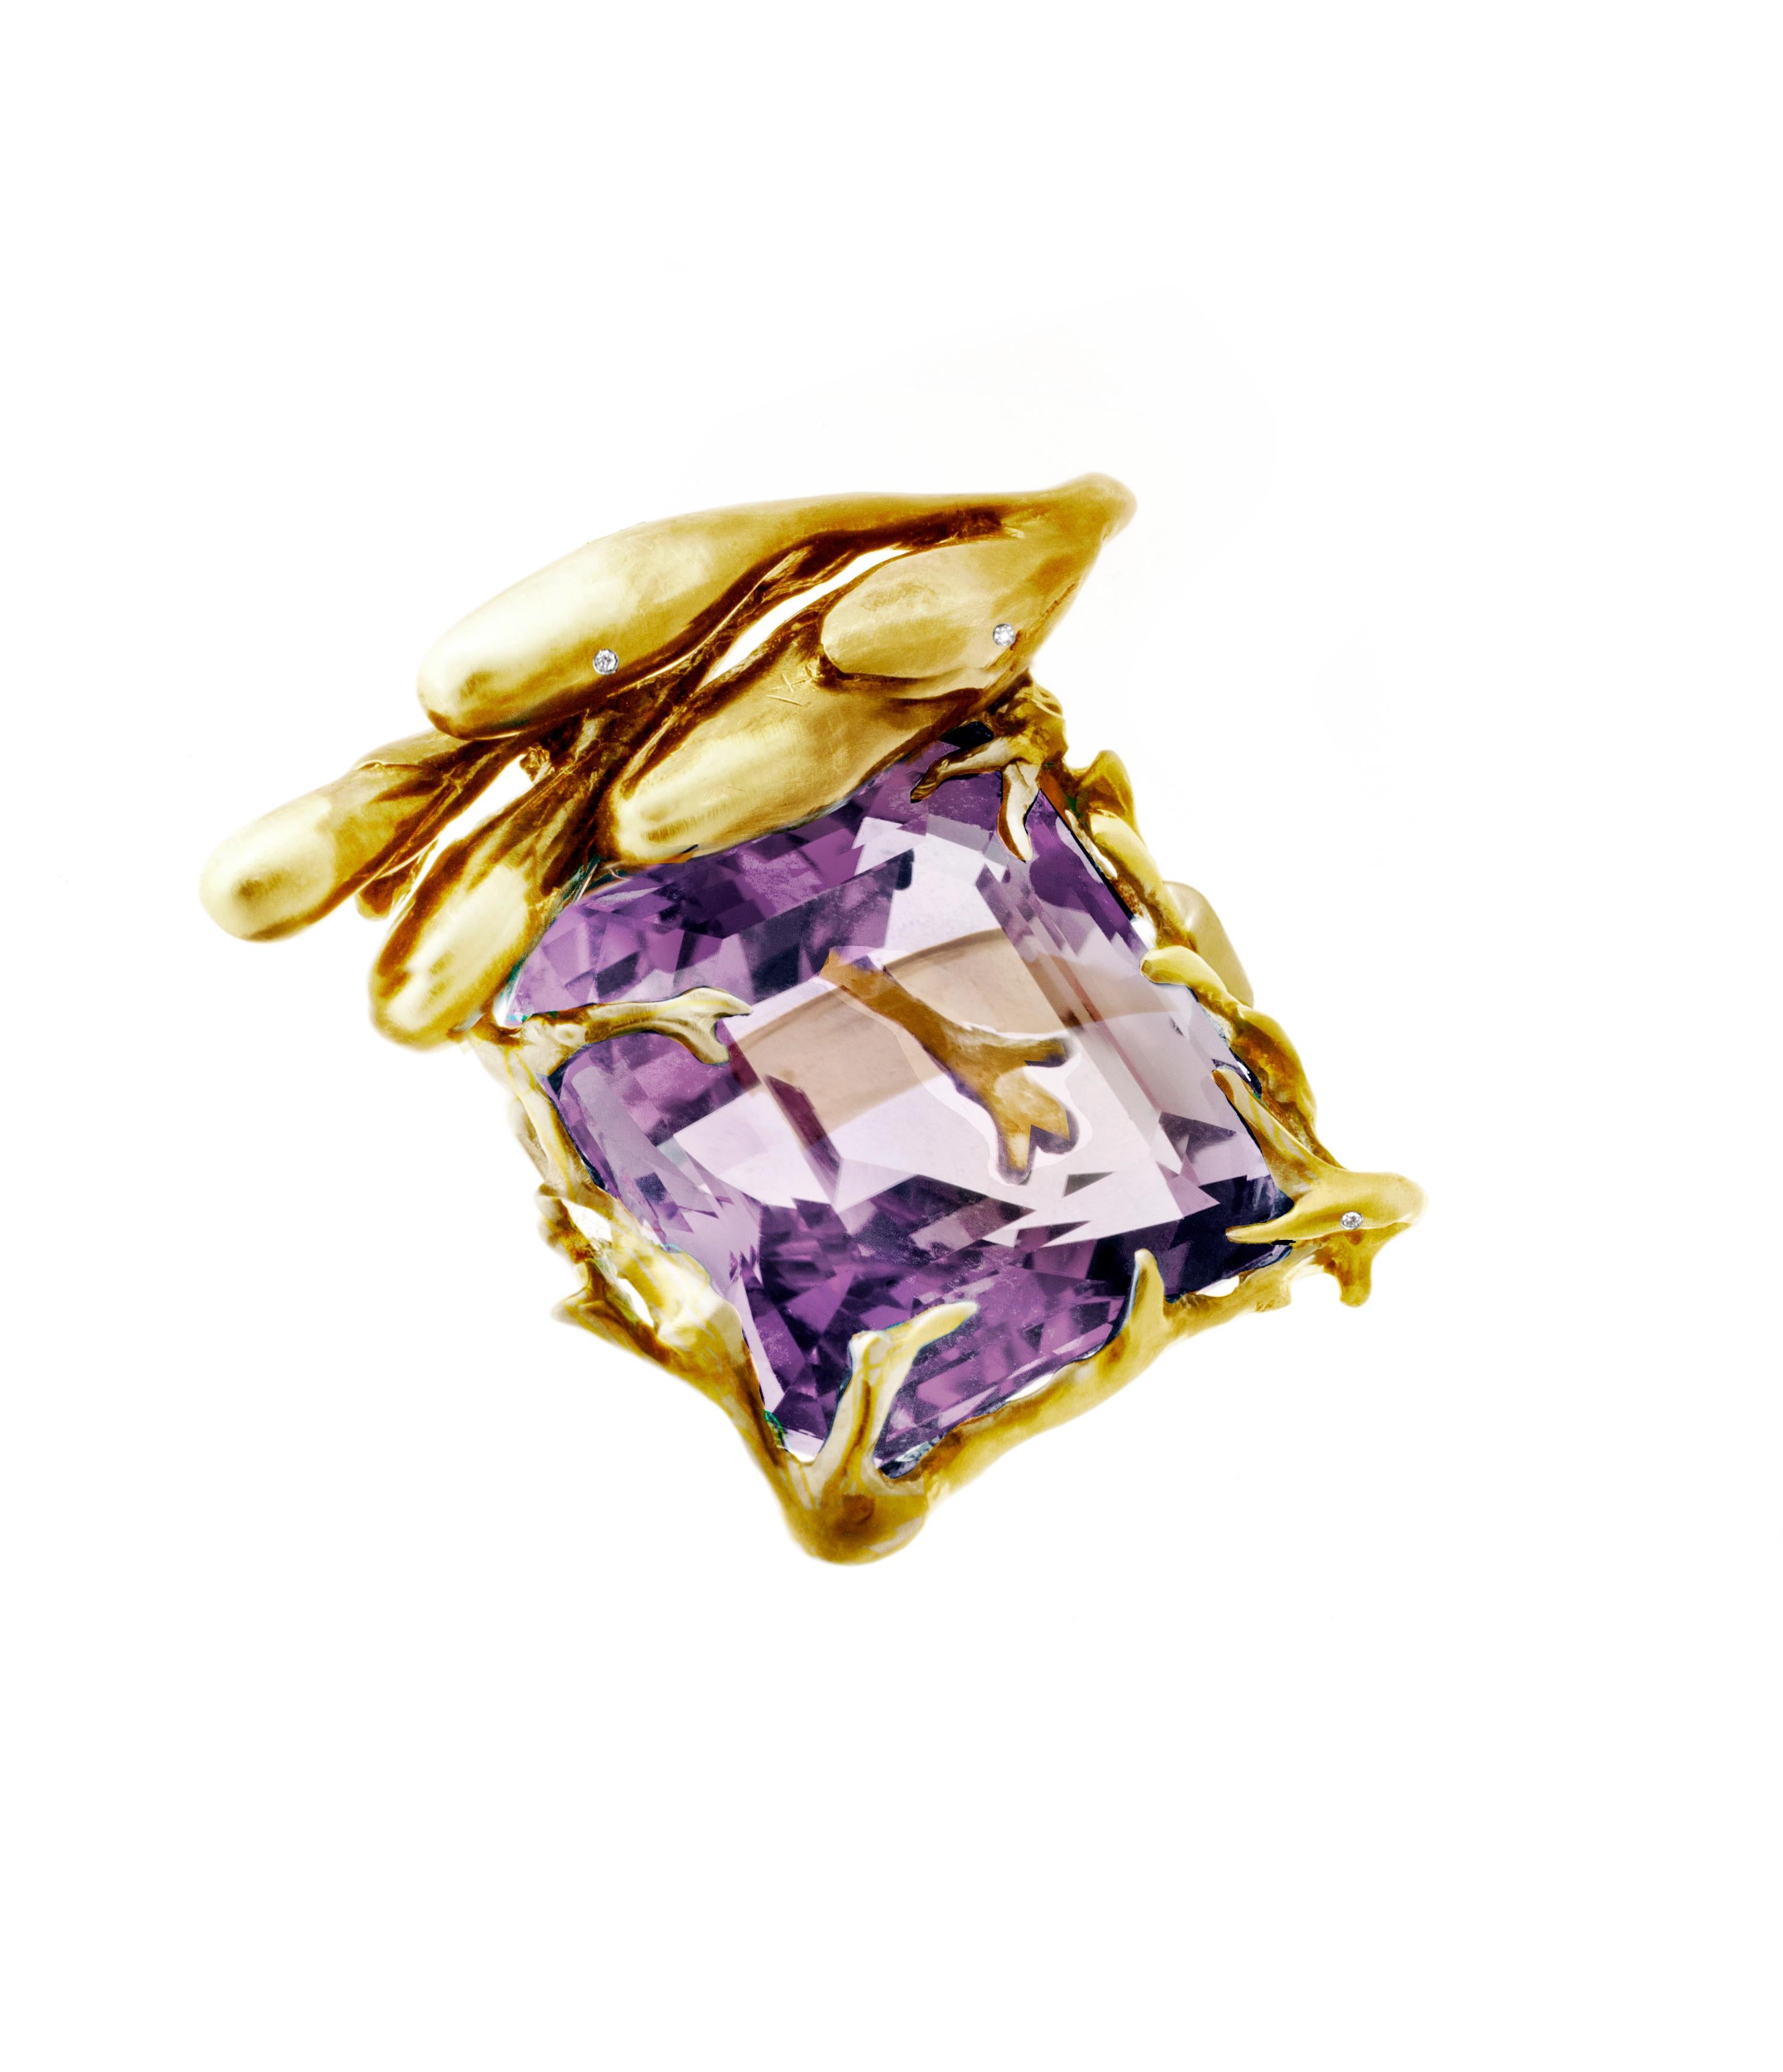 This Fairy Tale engagement ring is a contemporary masterpiece designed by oil painter Polya Medvedeva. It is crafted from 18 karat yellow gold and features an antique cushion cut amethyst that radiates vivid lavender tones. The ring is adorned with